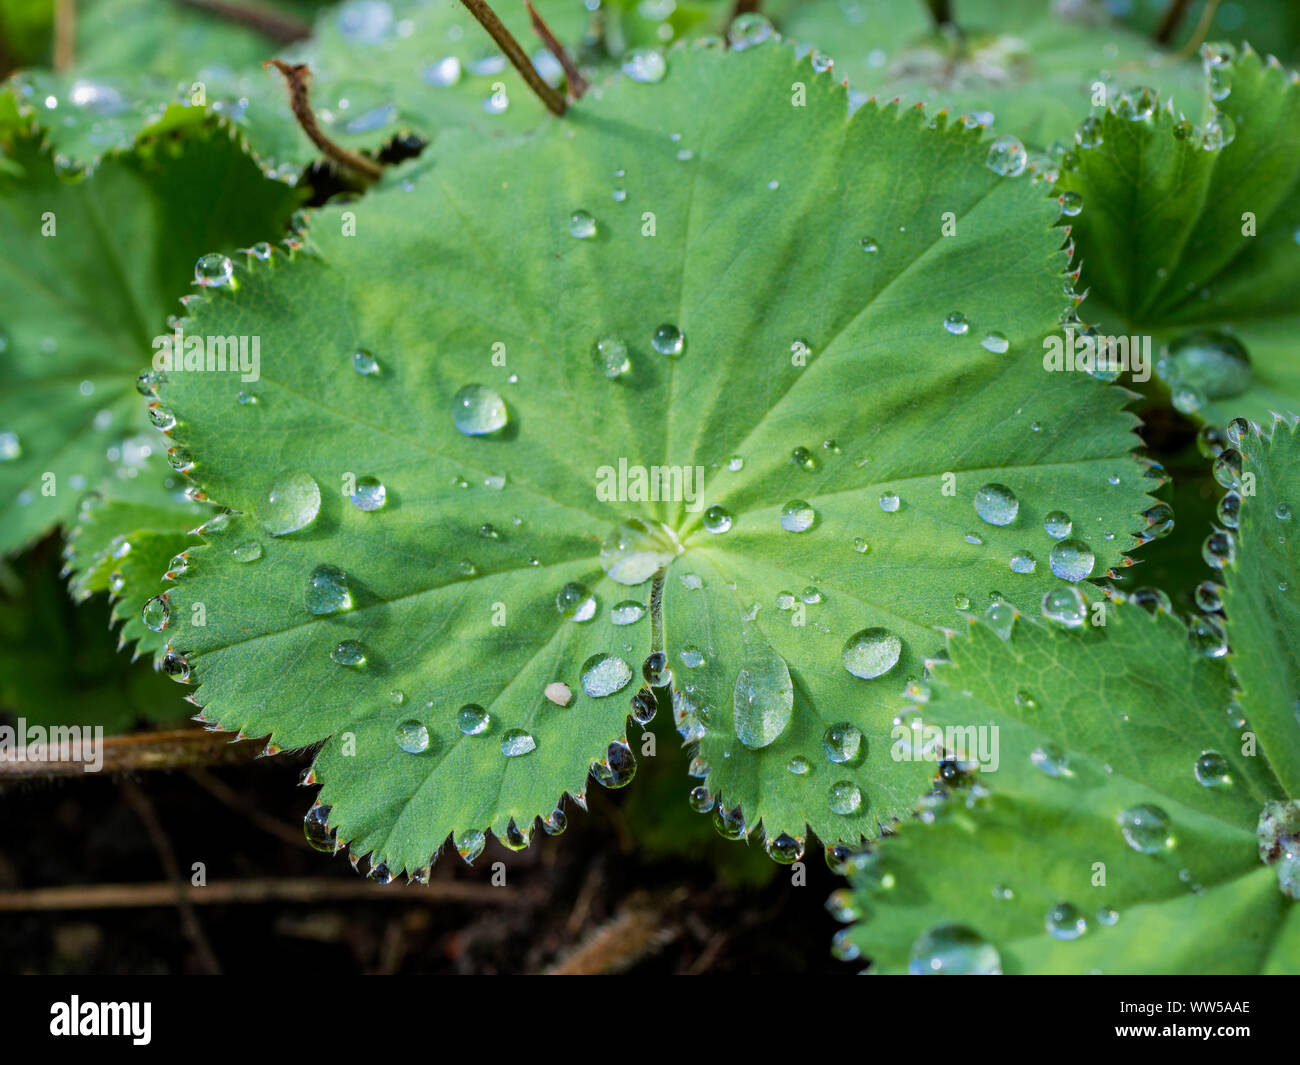 Drops of water on a leaf of the lady's mantle (Alchemilla) Stock Photo